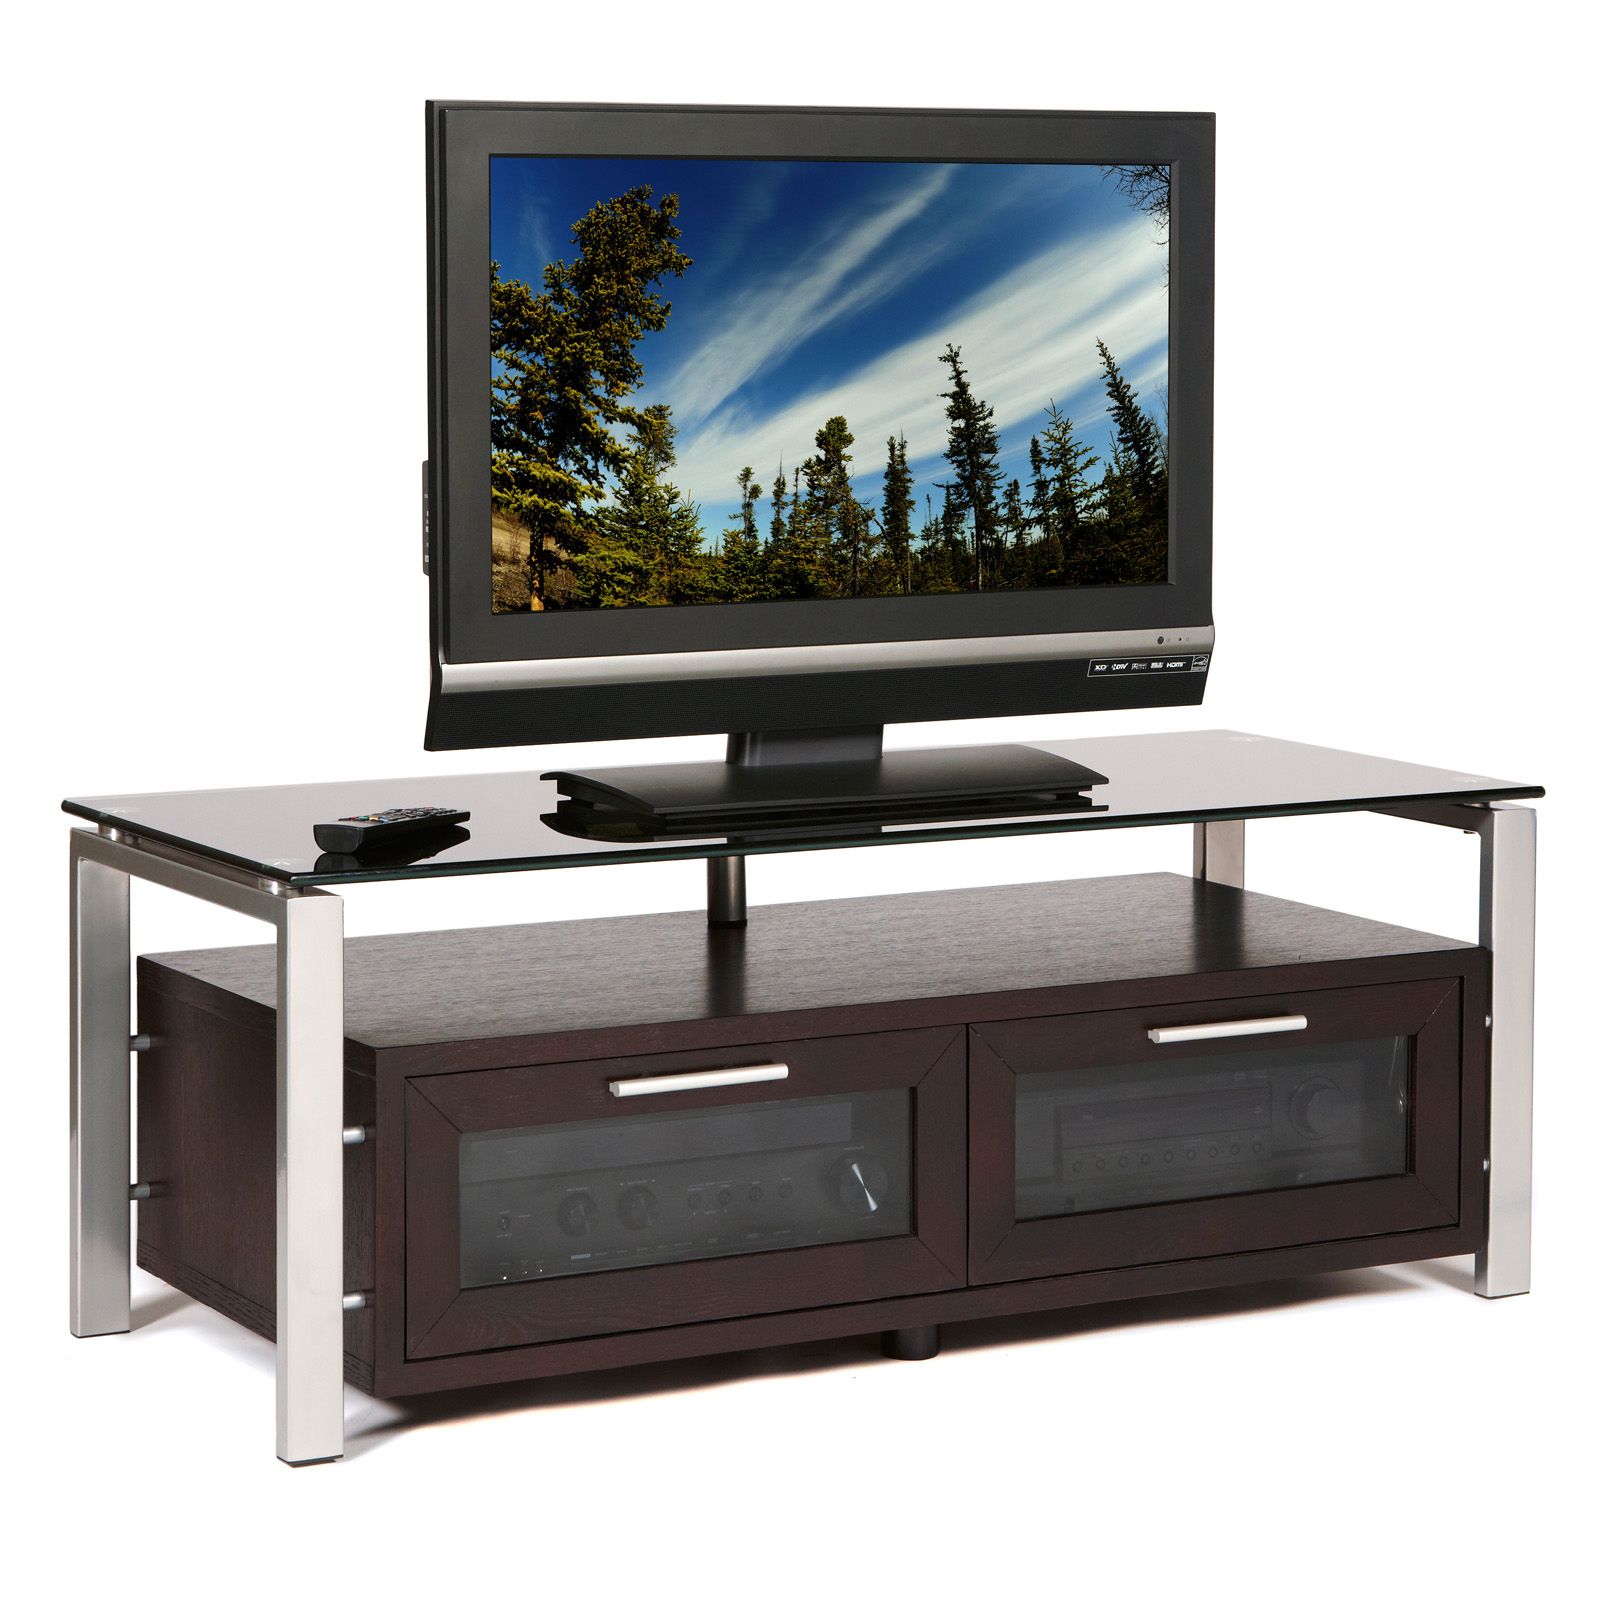 Plateau Decor 50 Inch Tv Stand In Espresso/black And In Tv Stands Fwith Tv Mount Silver/black (View 3 of 15)